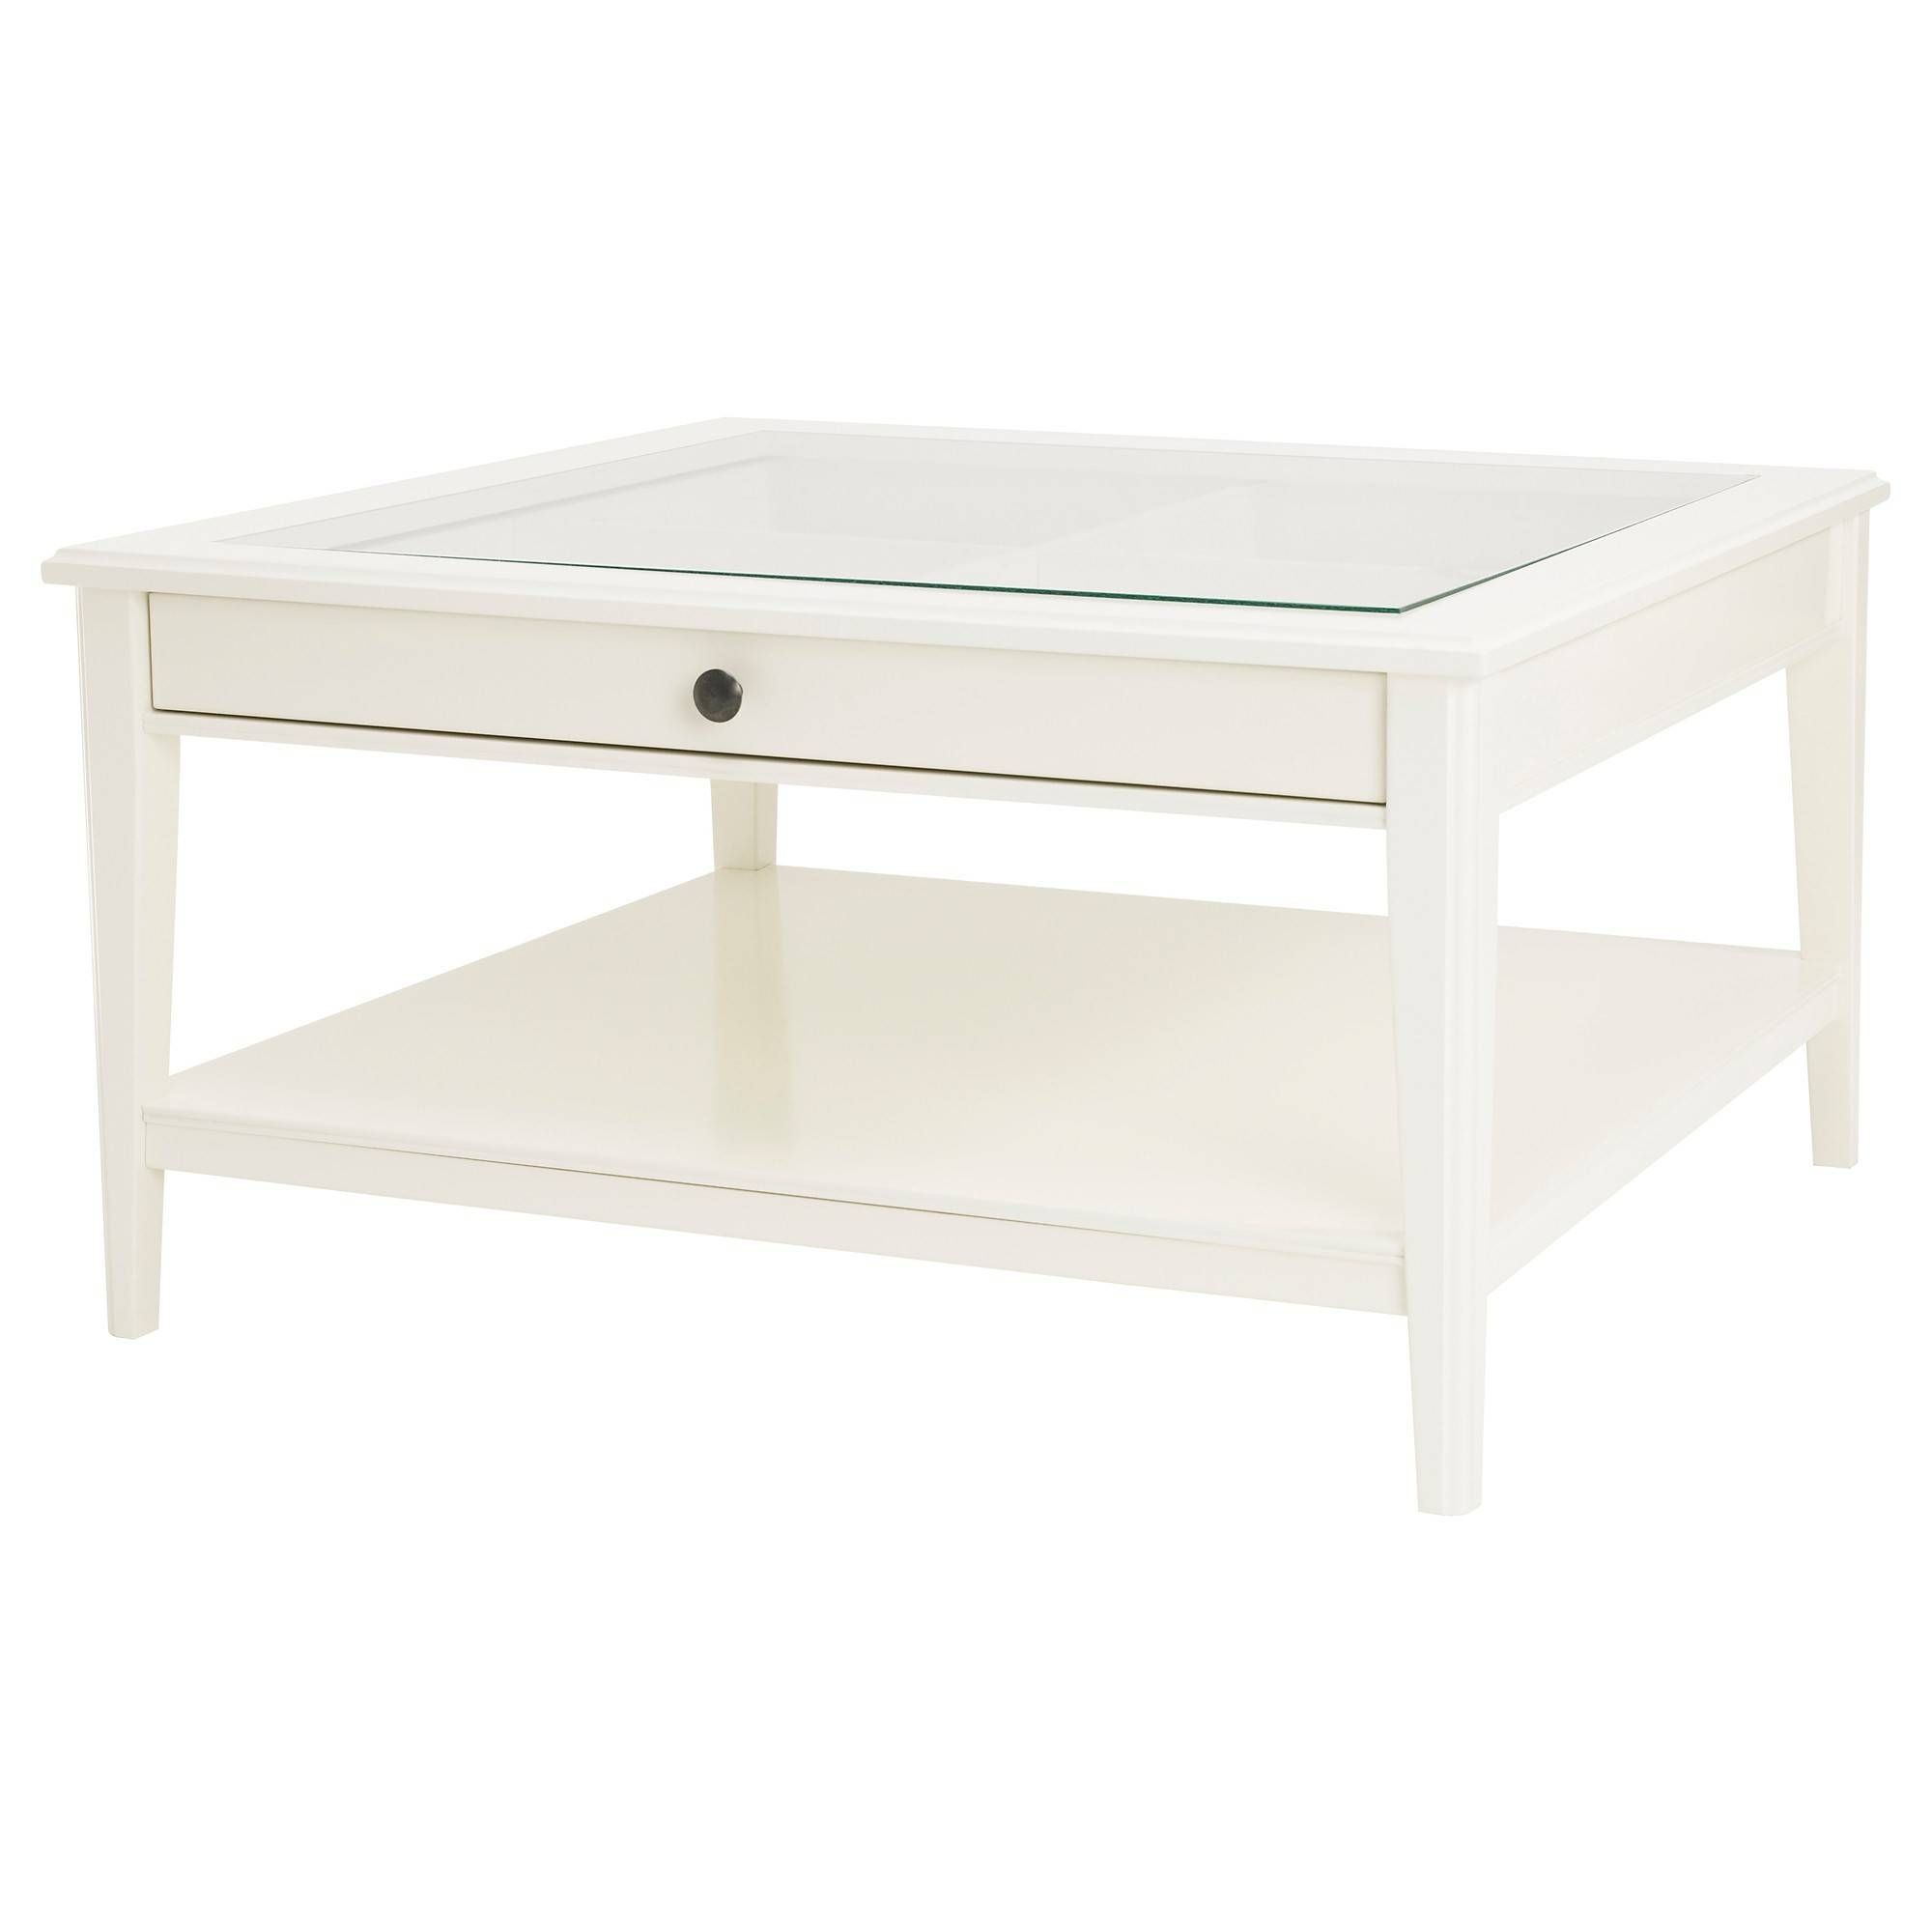 Furniture: Amusing White Glass Coffee Table Ideas White Glass Throughout French White Coffee Tables (View 8 of 30)